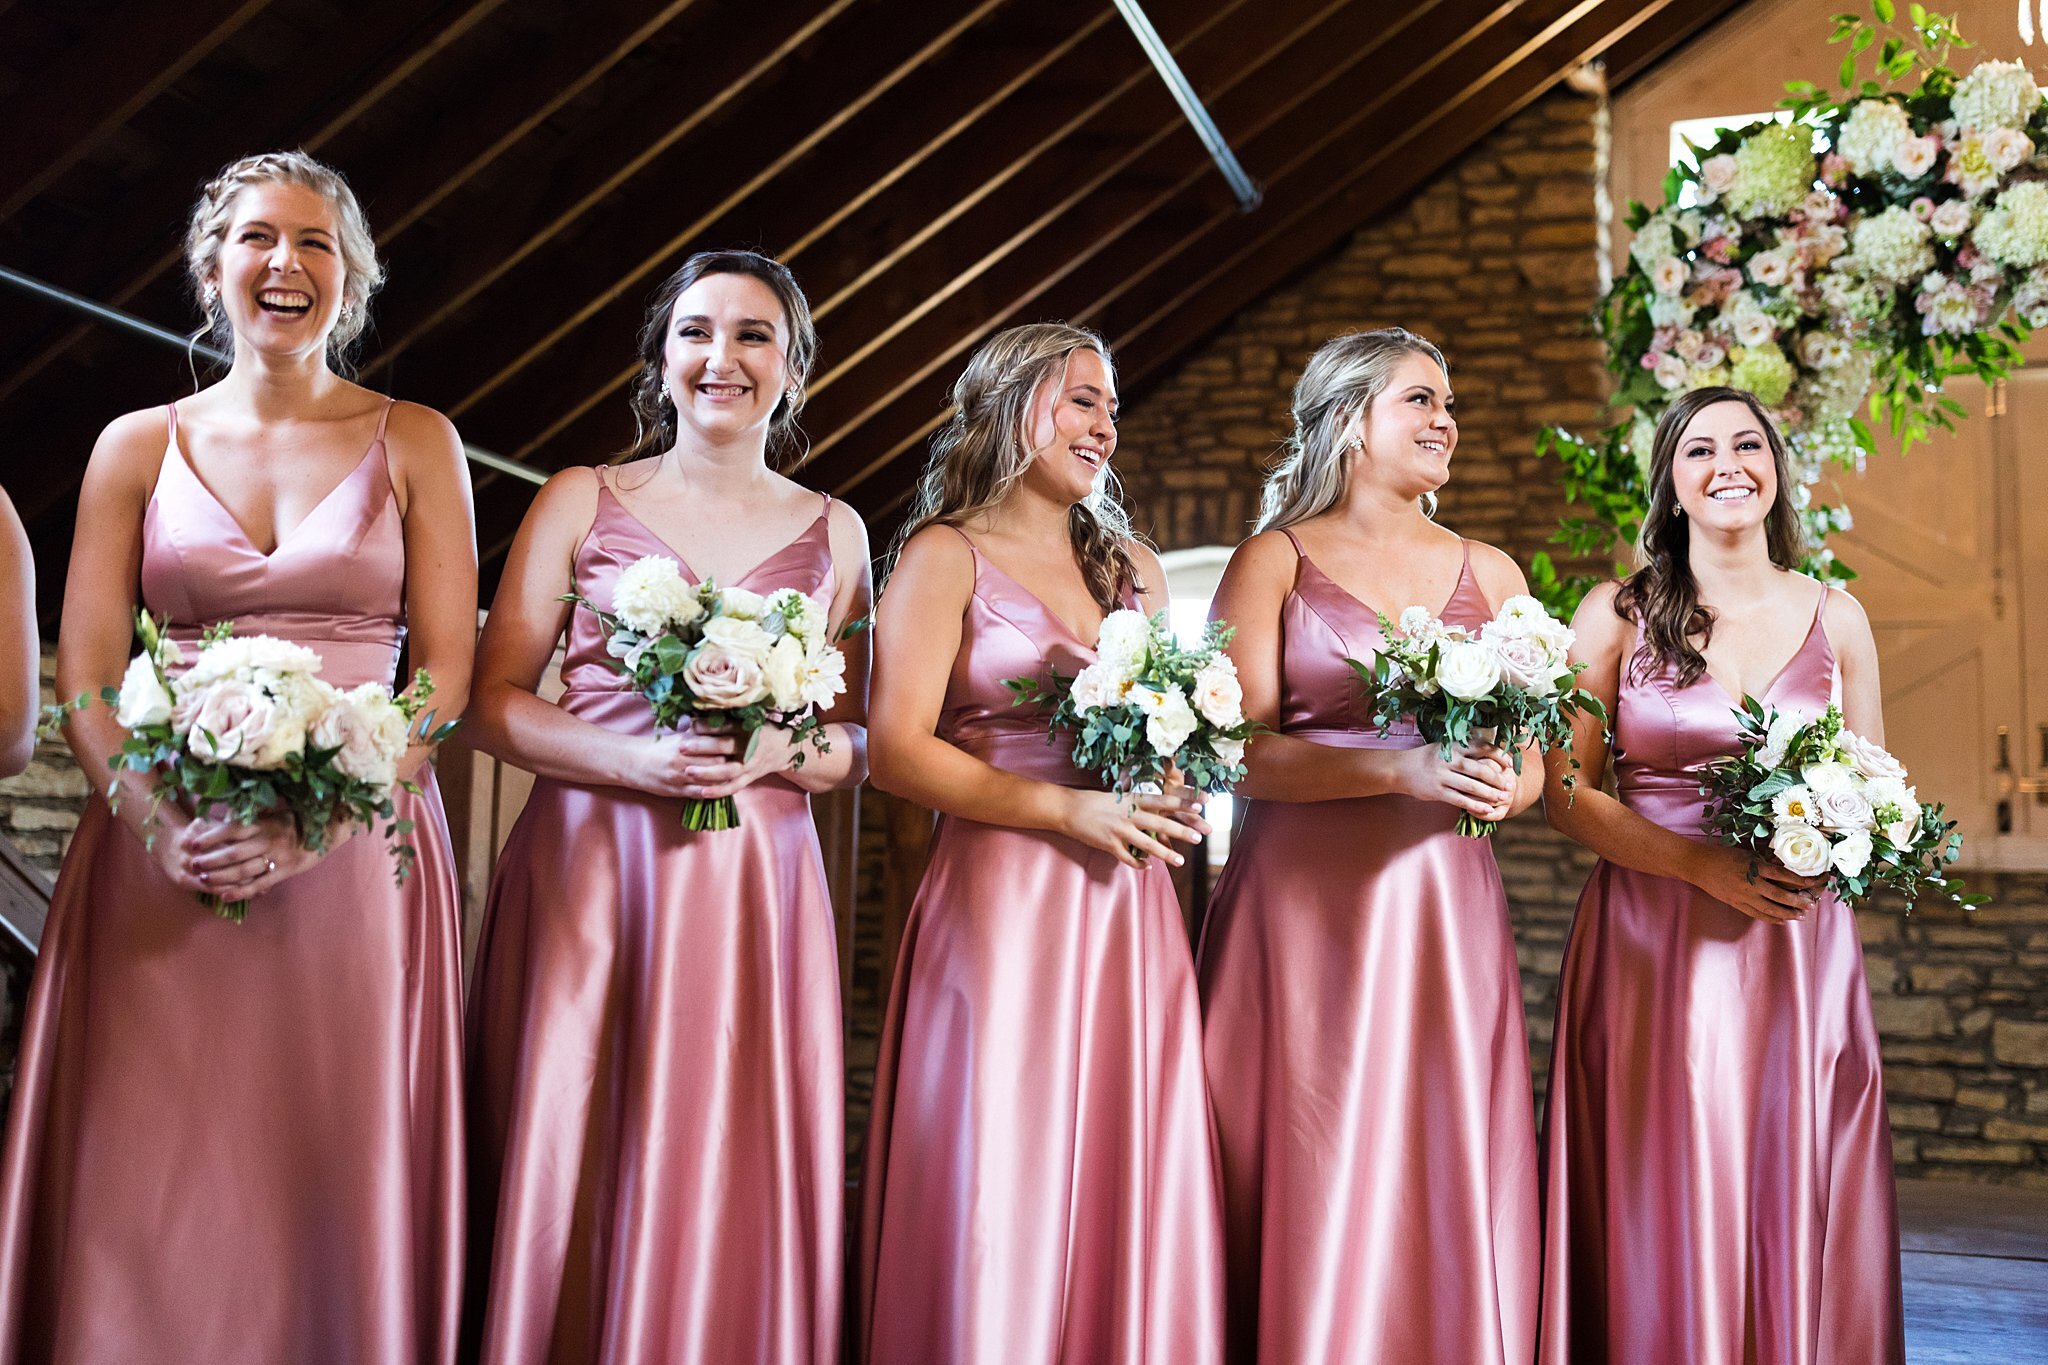  Bridesmaids holding bridal bouquets during ceremony. 